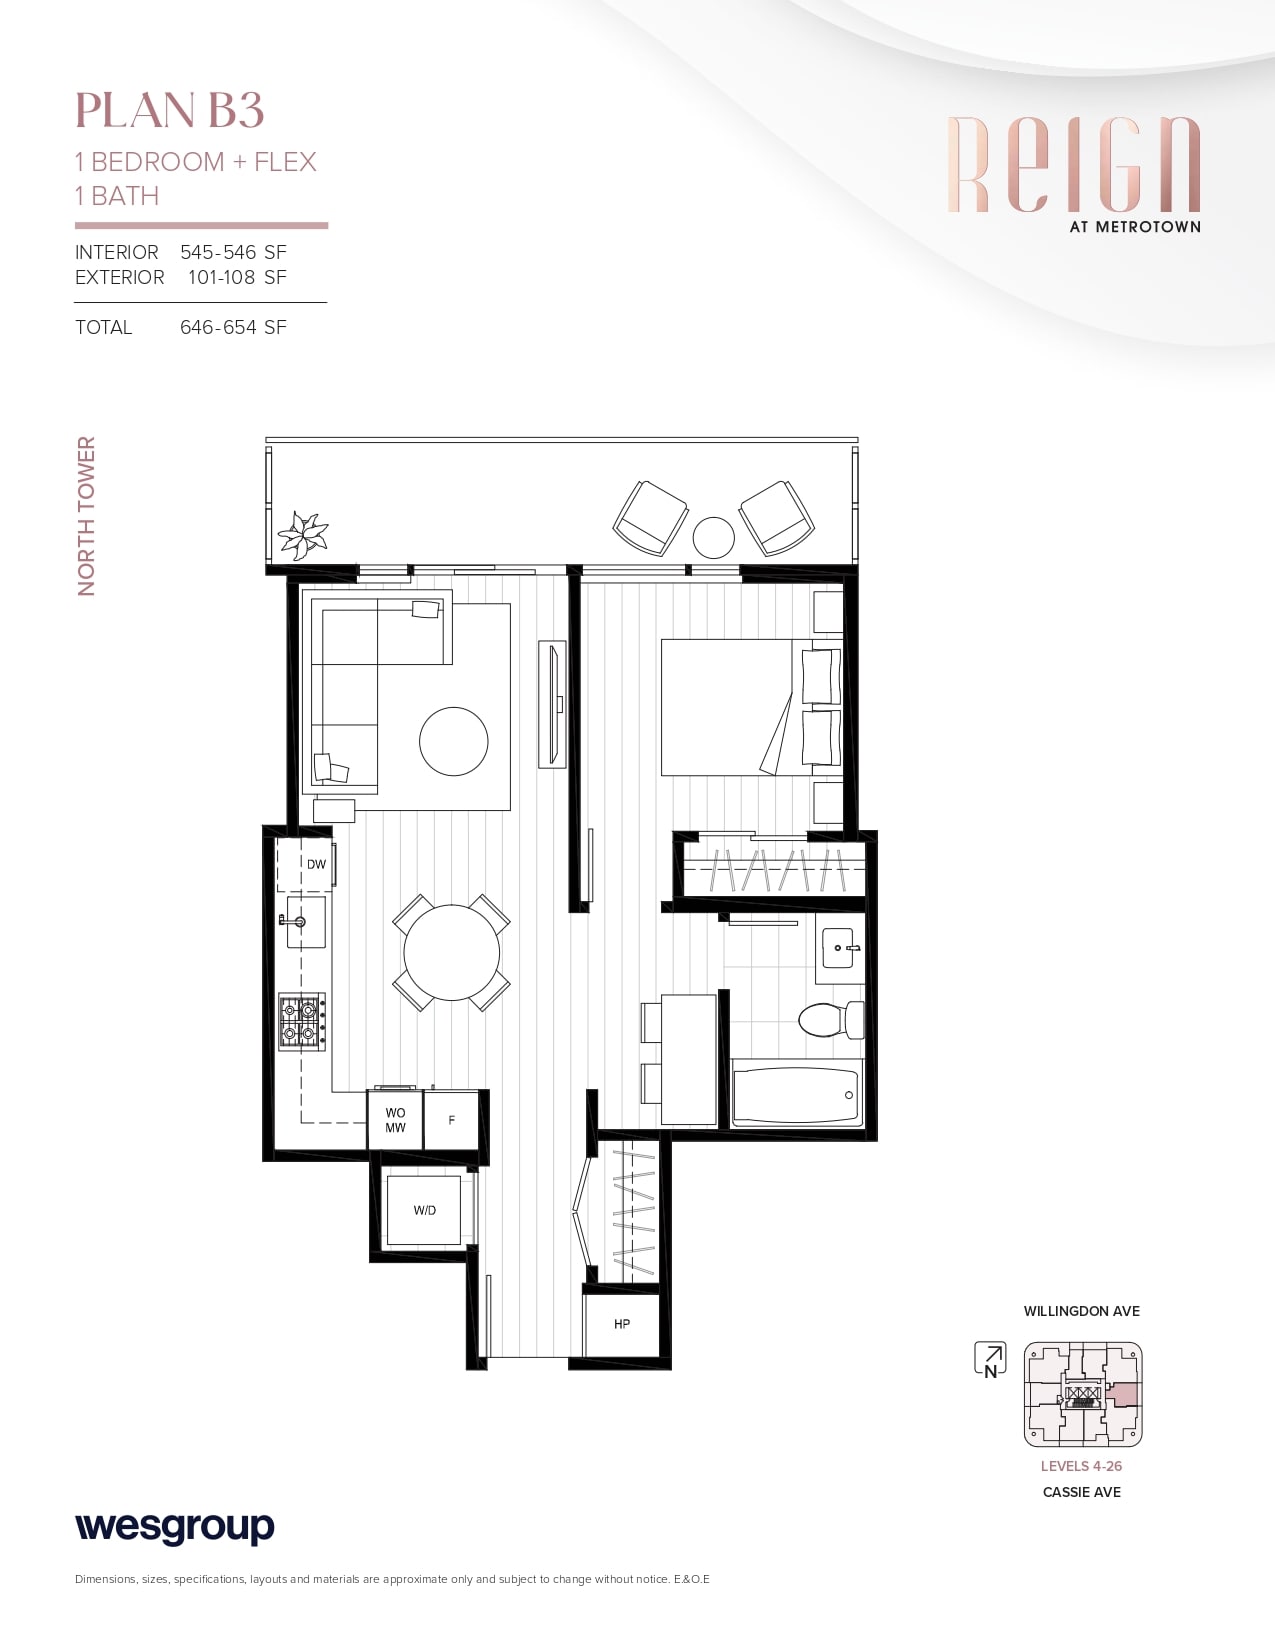 Reign_-_North_Tower_-_Typical_Floorplans_-_FINAL__page-0005-min.jpg